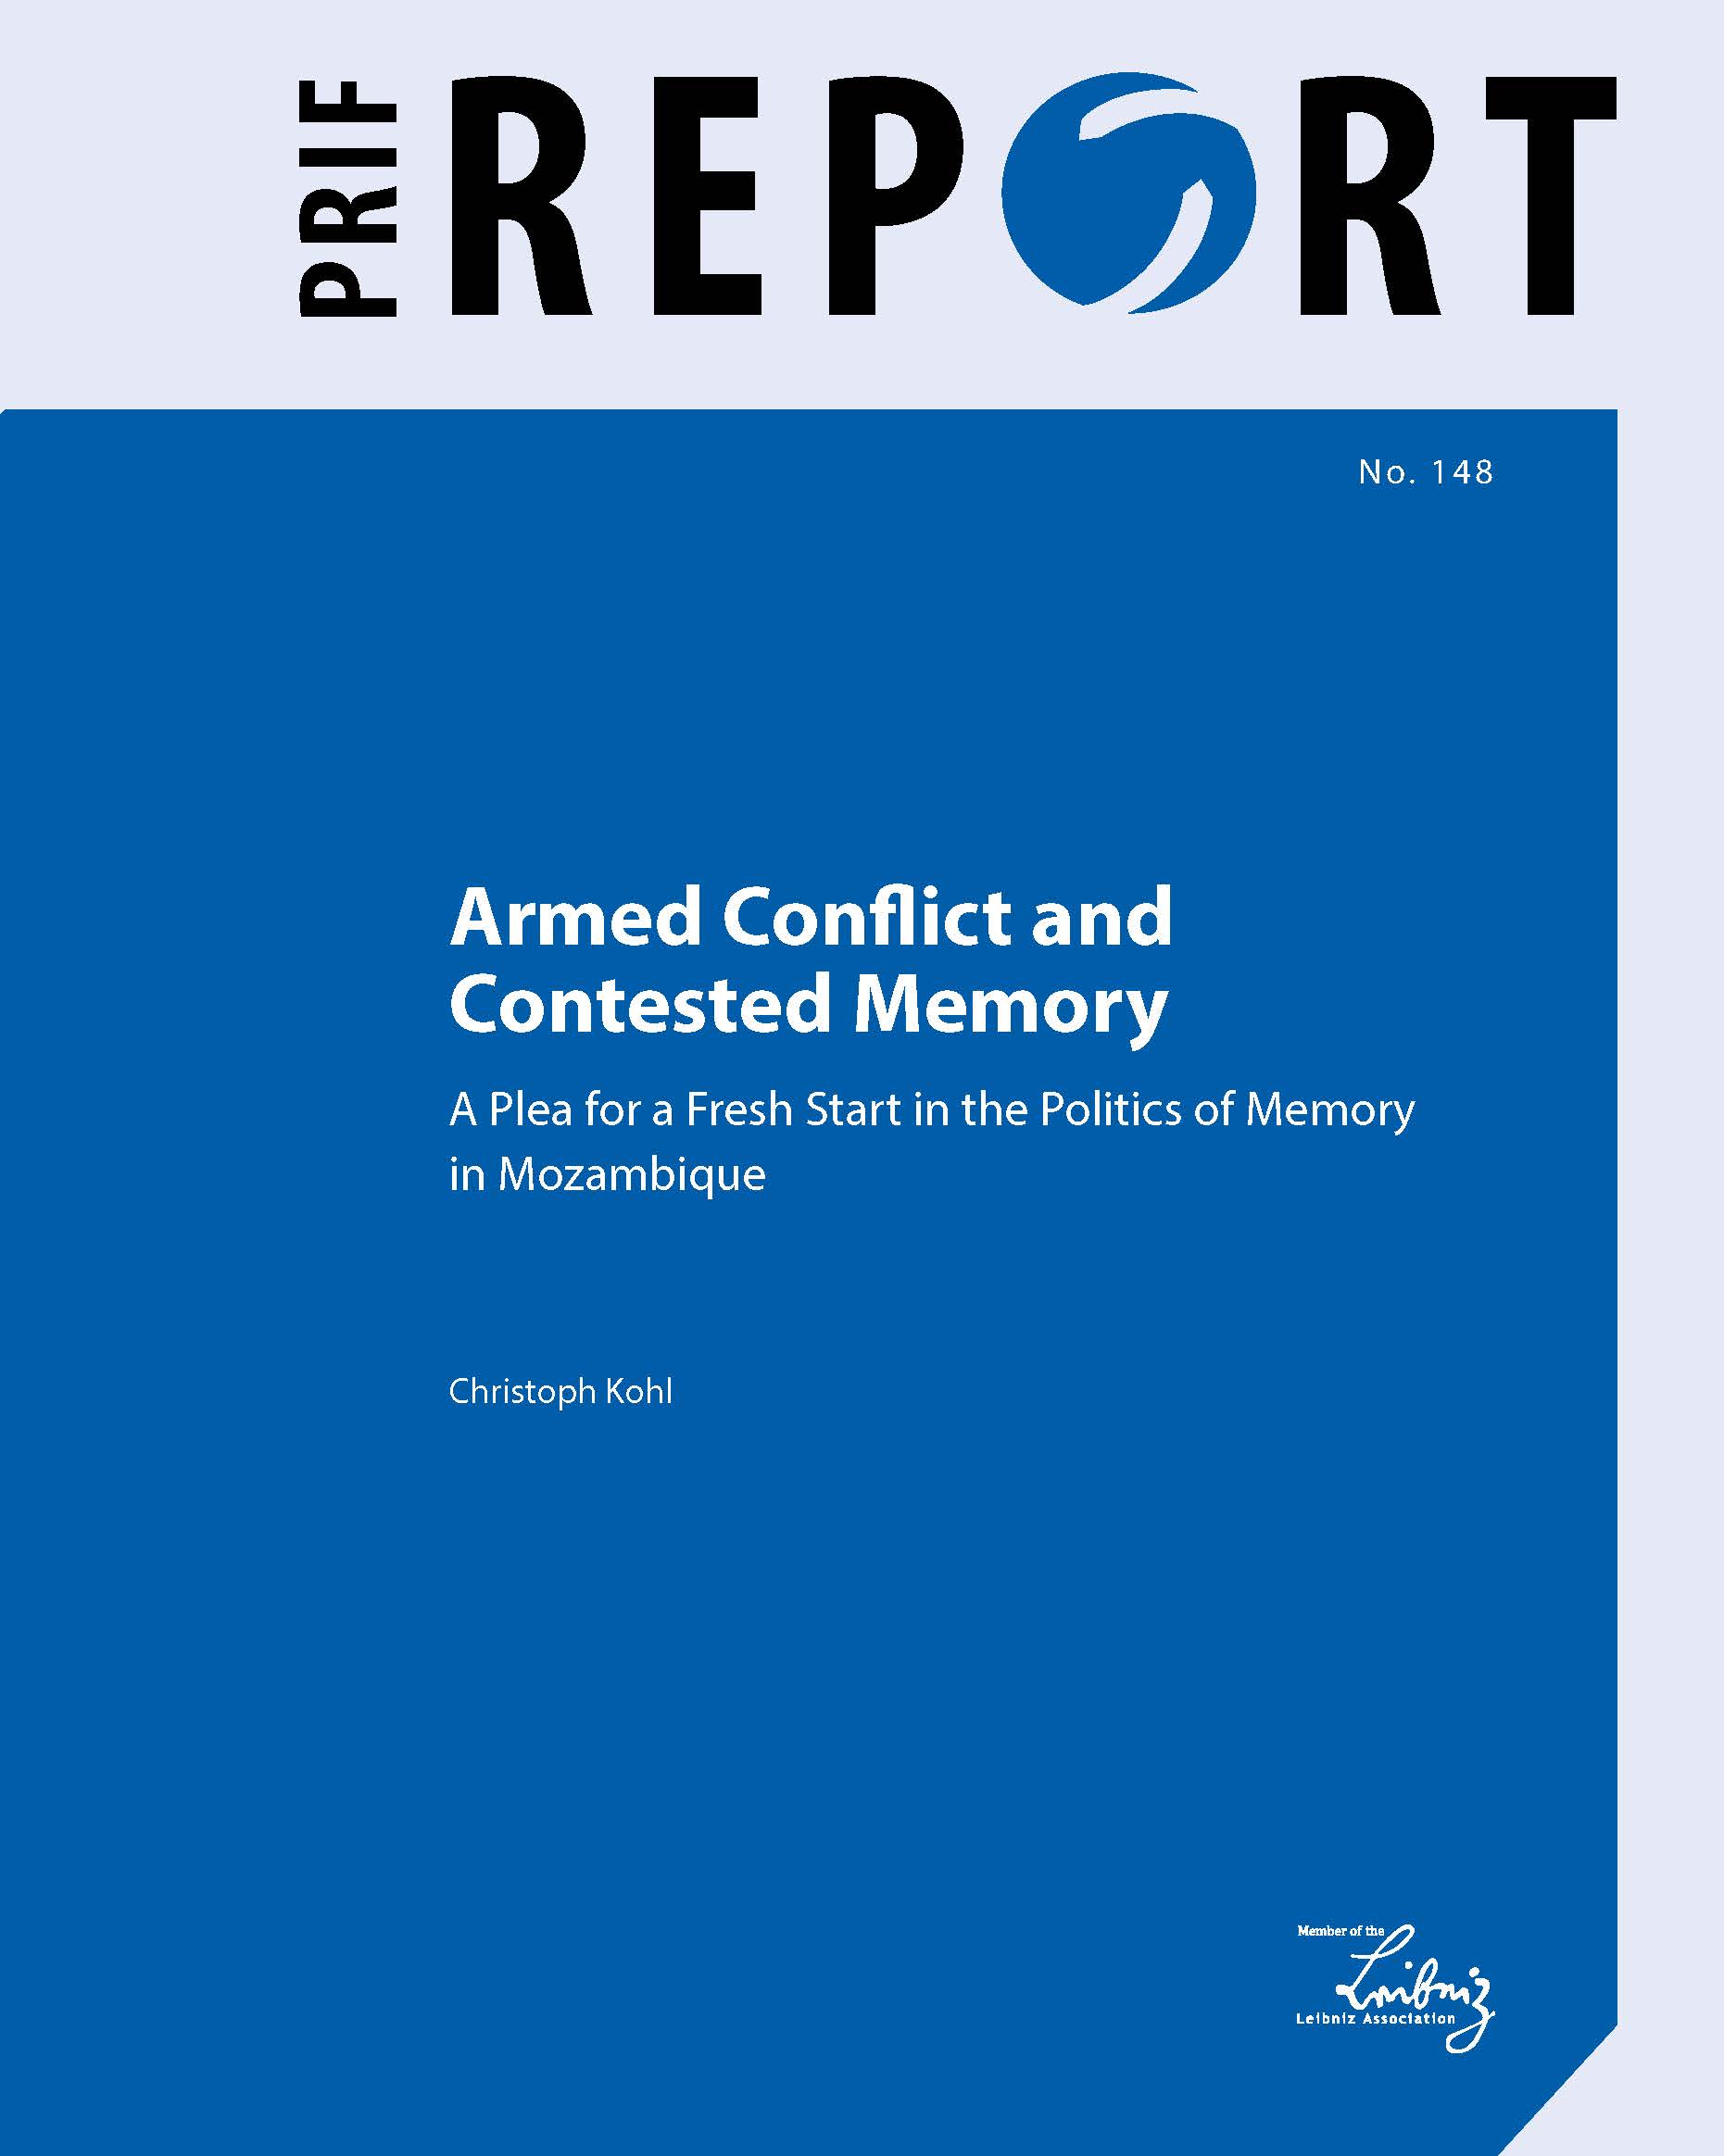 Download: Armed Conflict and Contested Memory